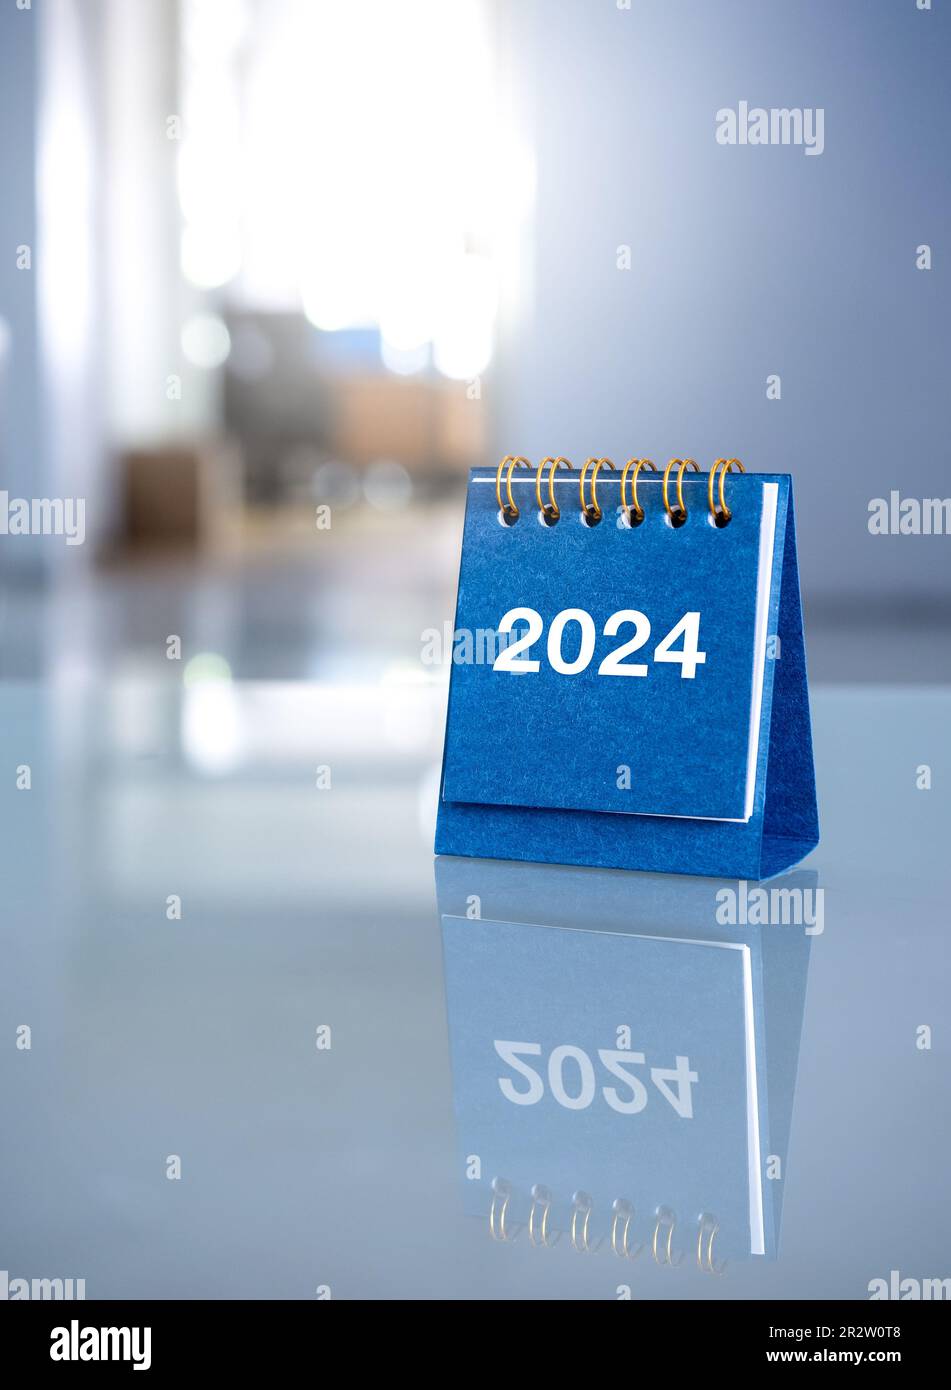 Happy new year 2024 background. 2024 numbers year on blue small desk calendar cover standing on glass table at office workplace with copy space, verti Stock Photo